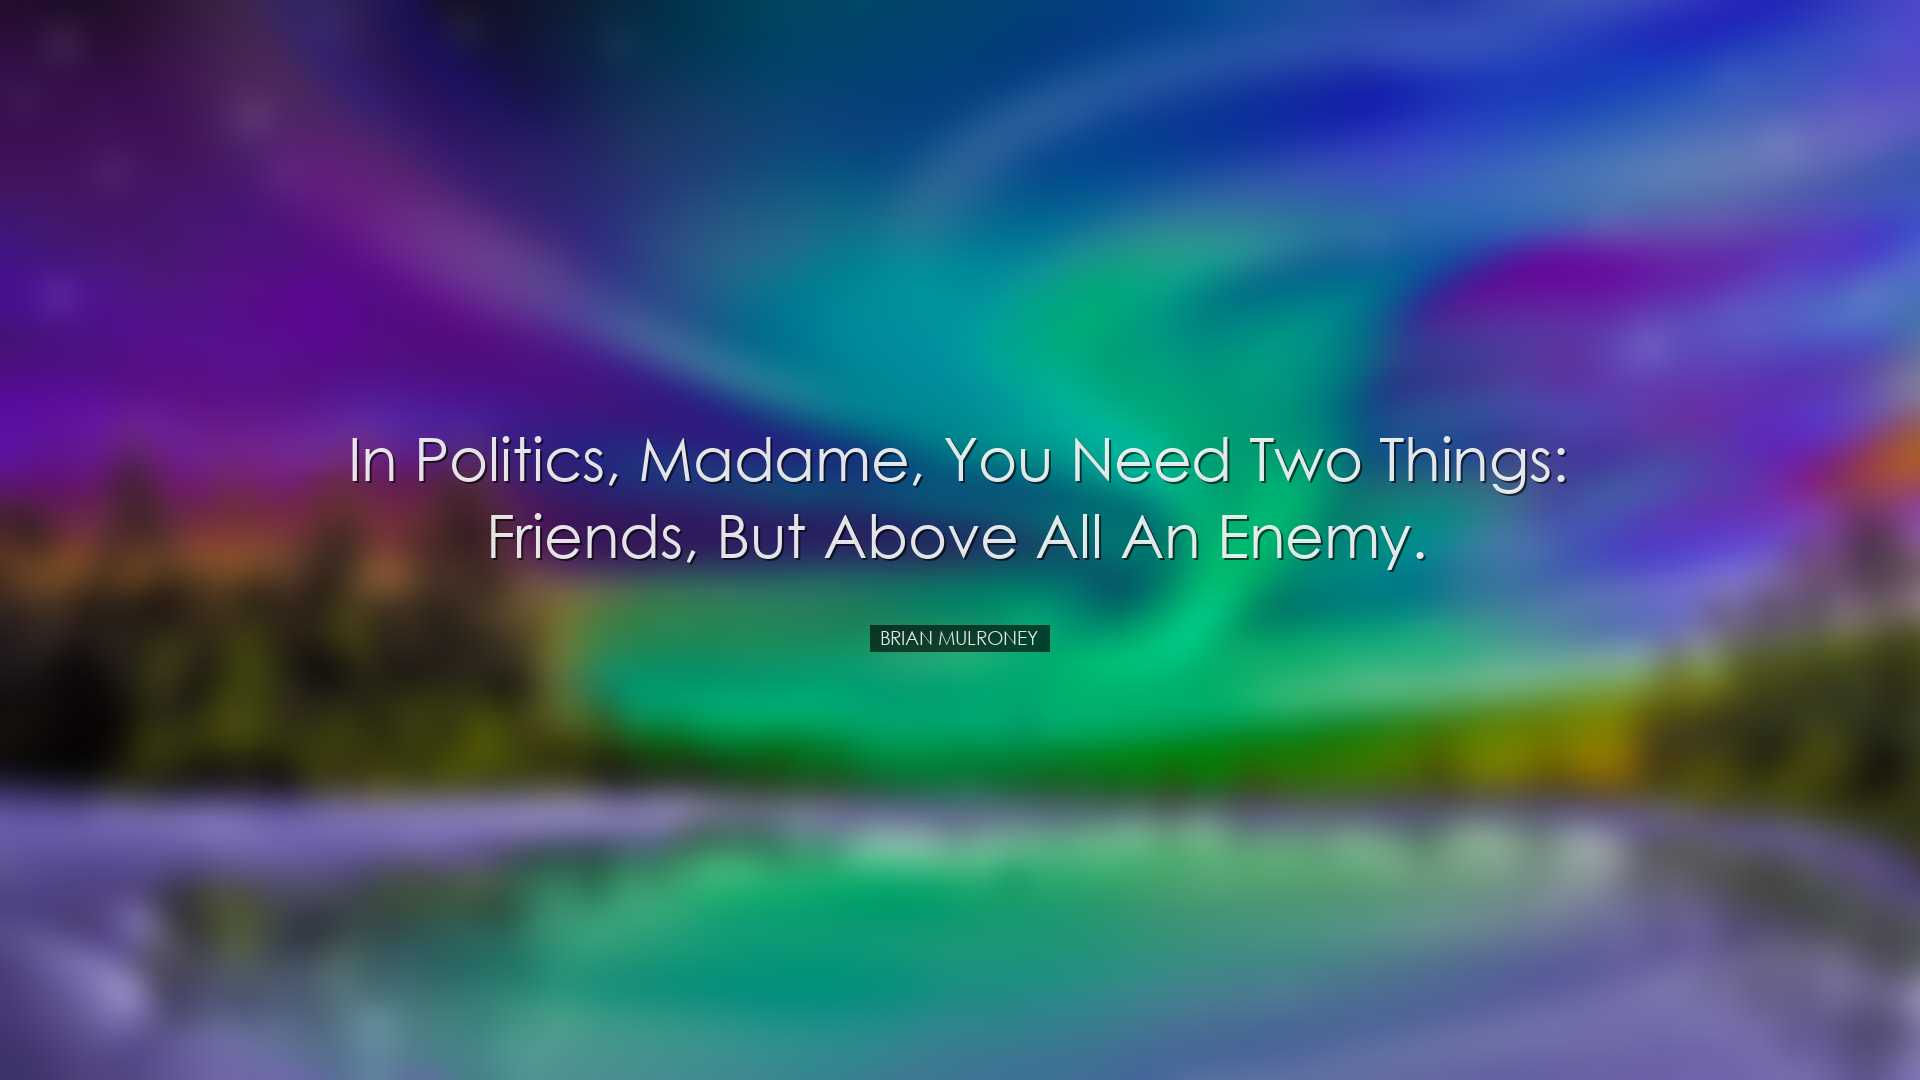 In politics, madame, you need two things: friends, but above all a